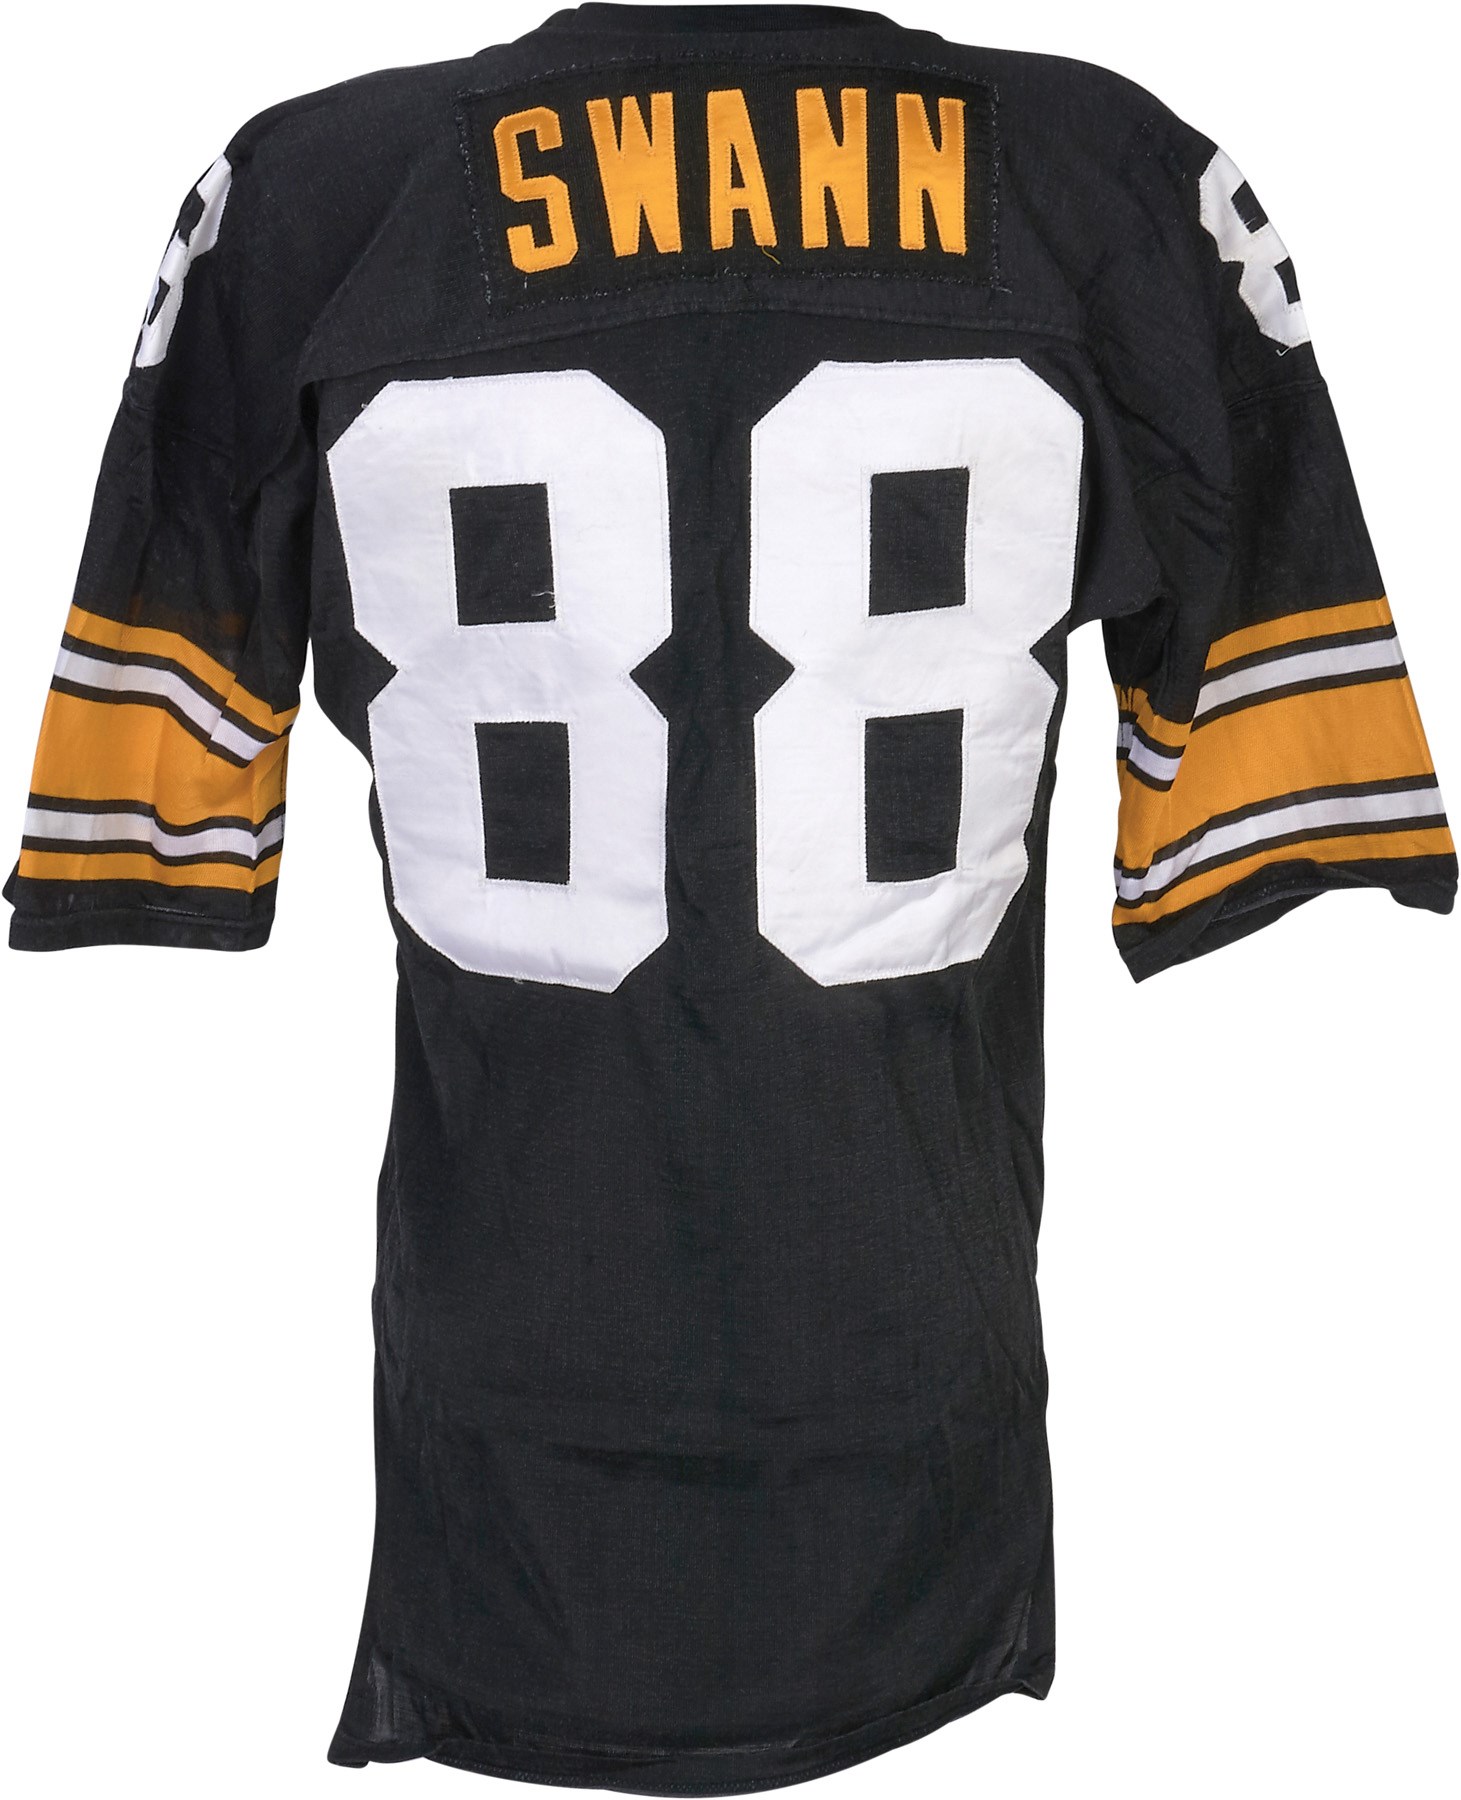 - 1982 Lynn Swann Pittsburgh Steelers Game Worn Jersey (Photo-Matched)